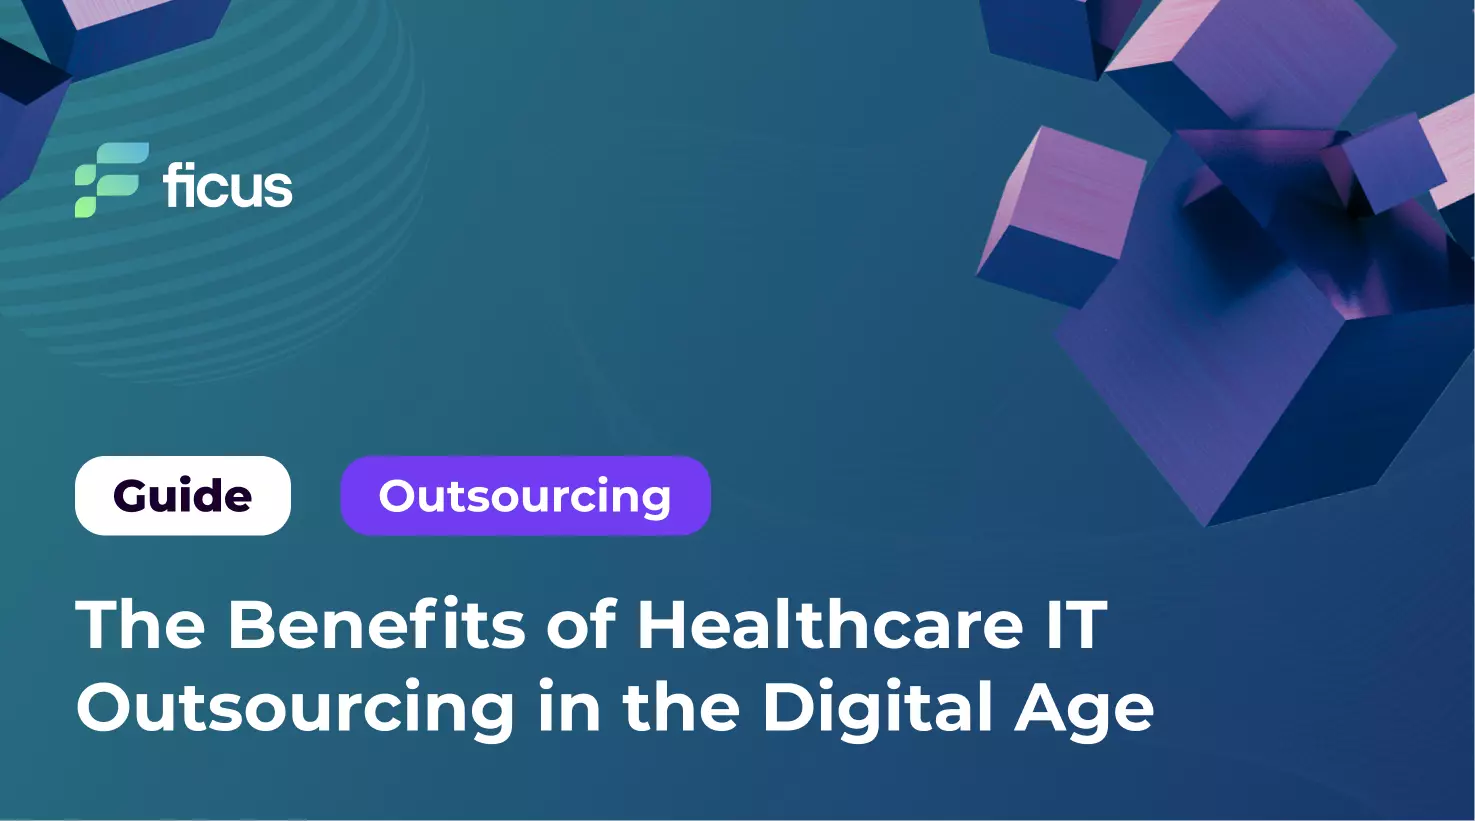 2_The Benefits of Healthcare IT Outsourcing in the Digital Age